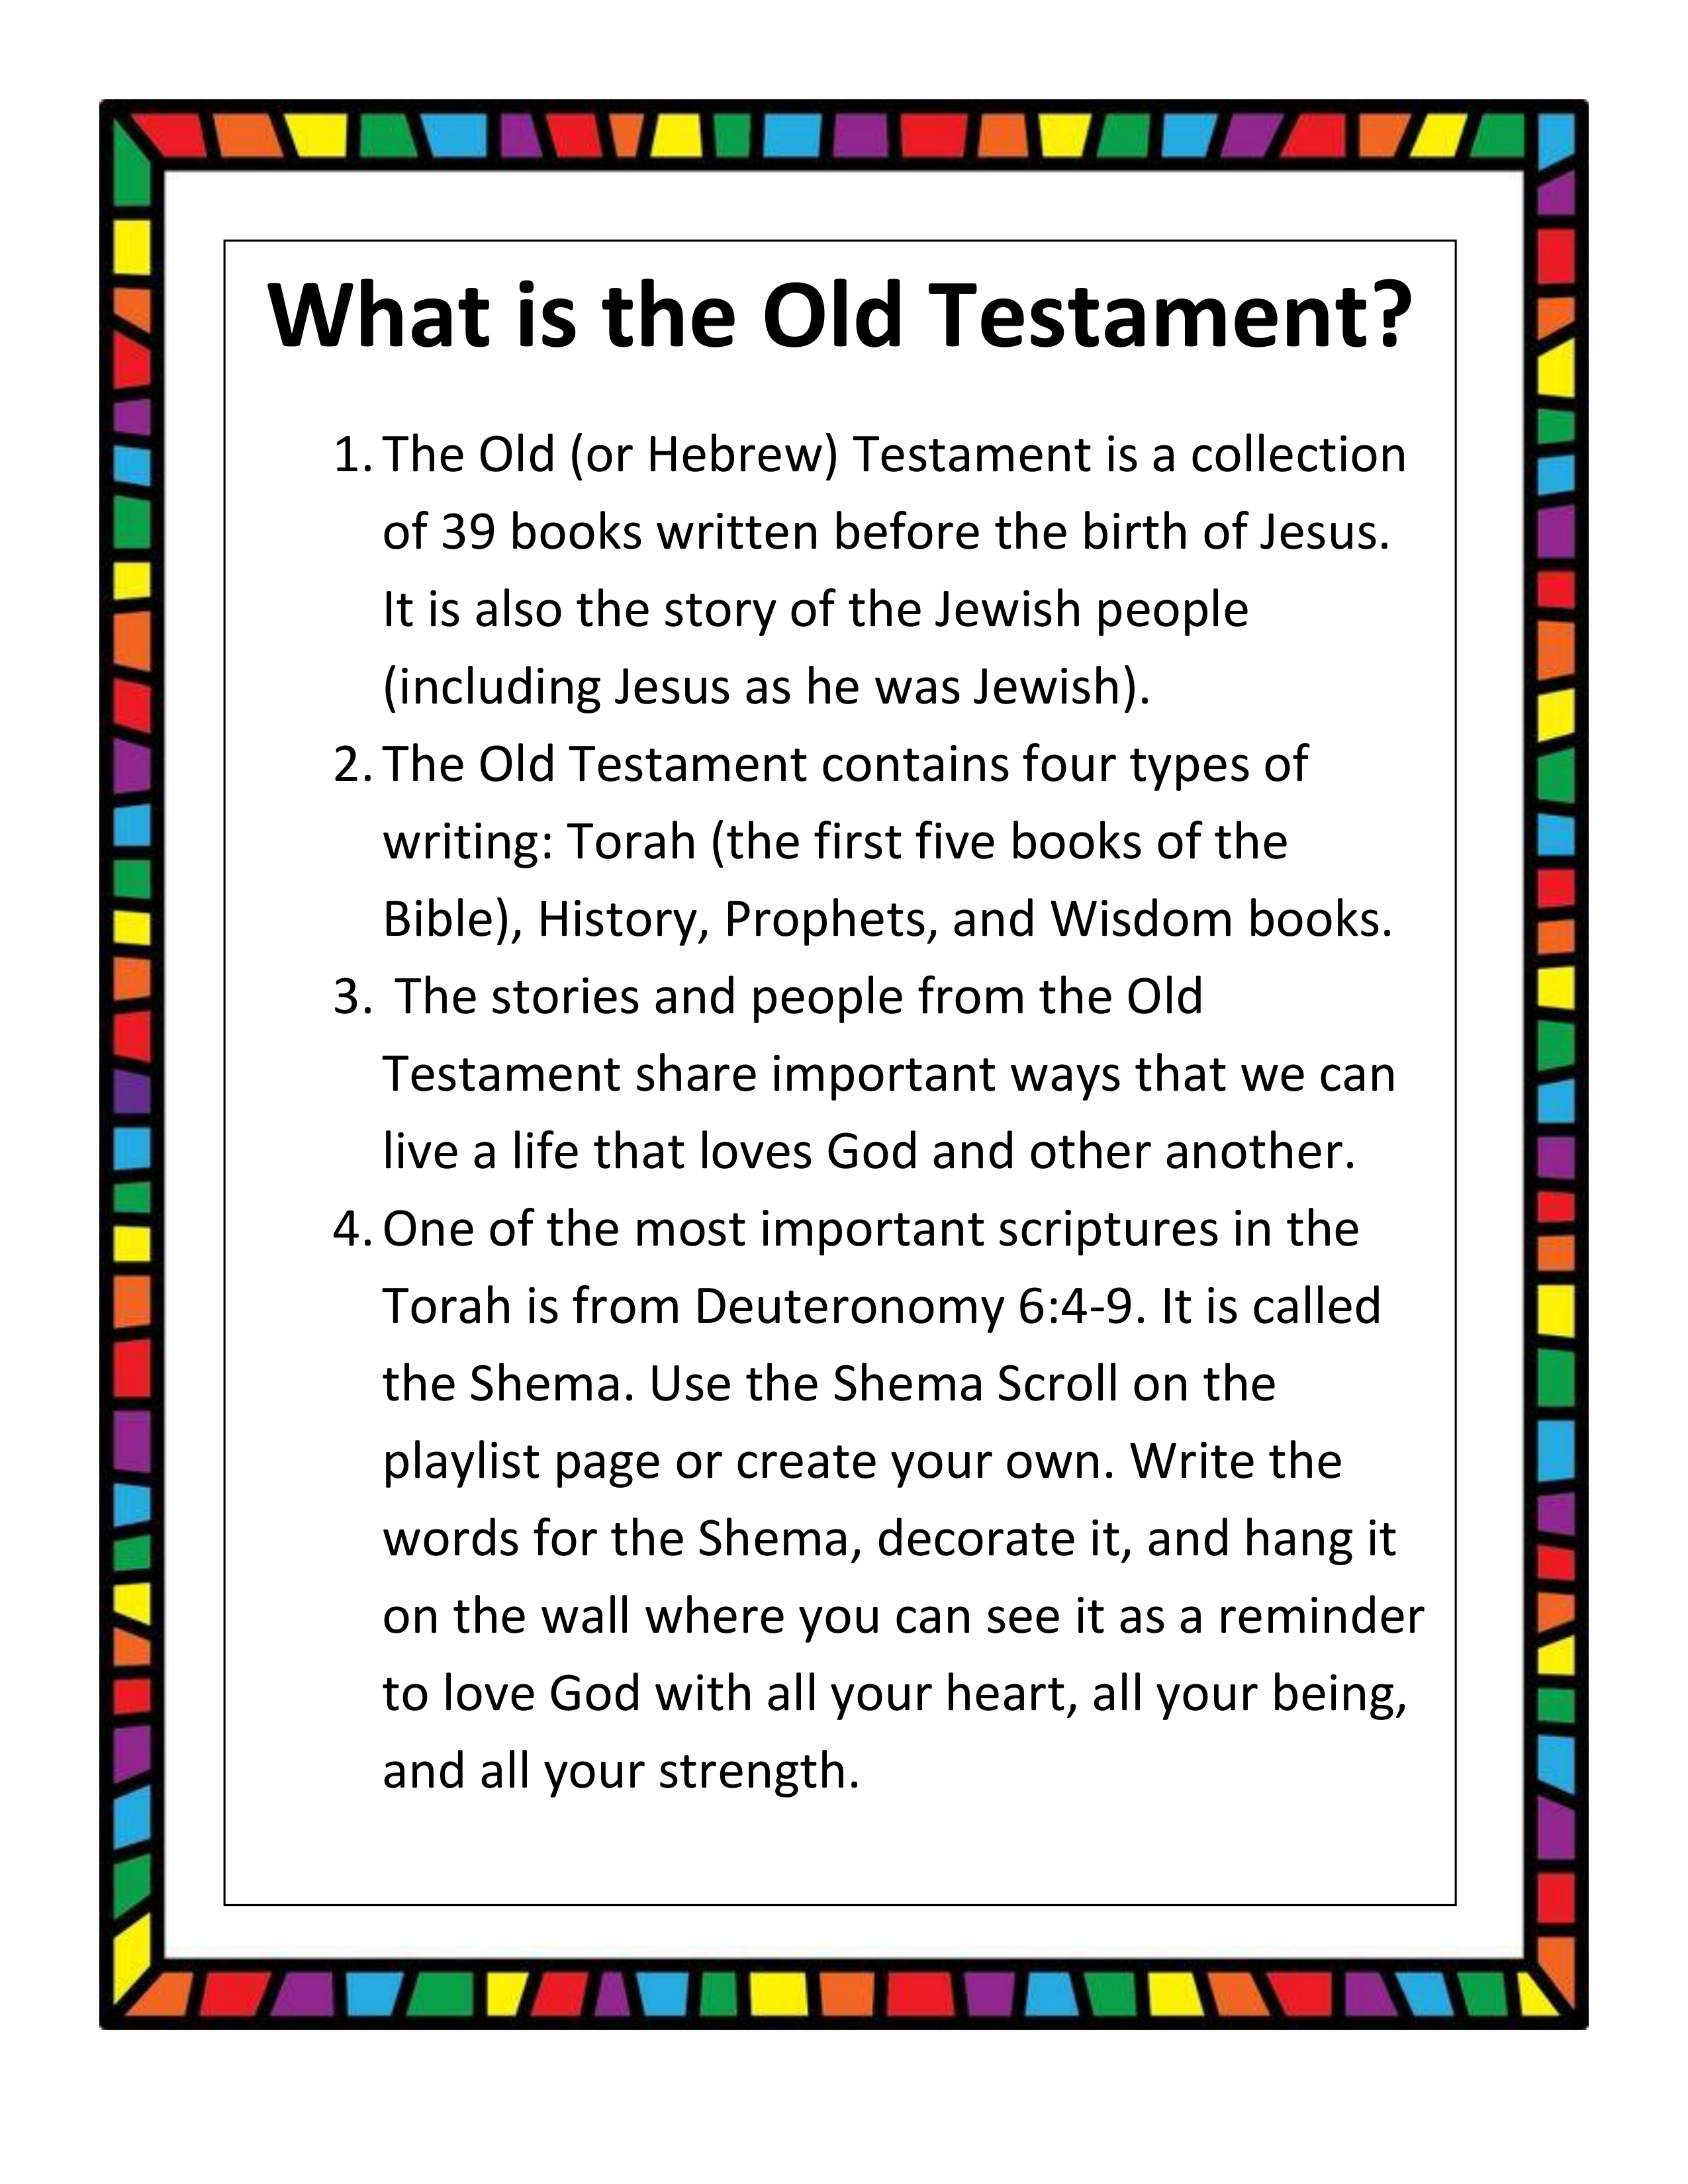 Information Sheet for kids to learn about the Old Testament